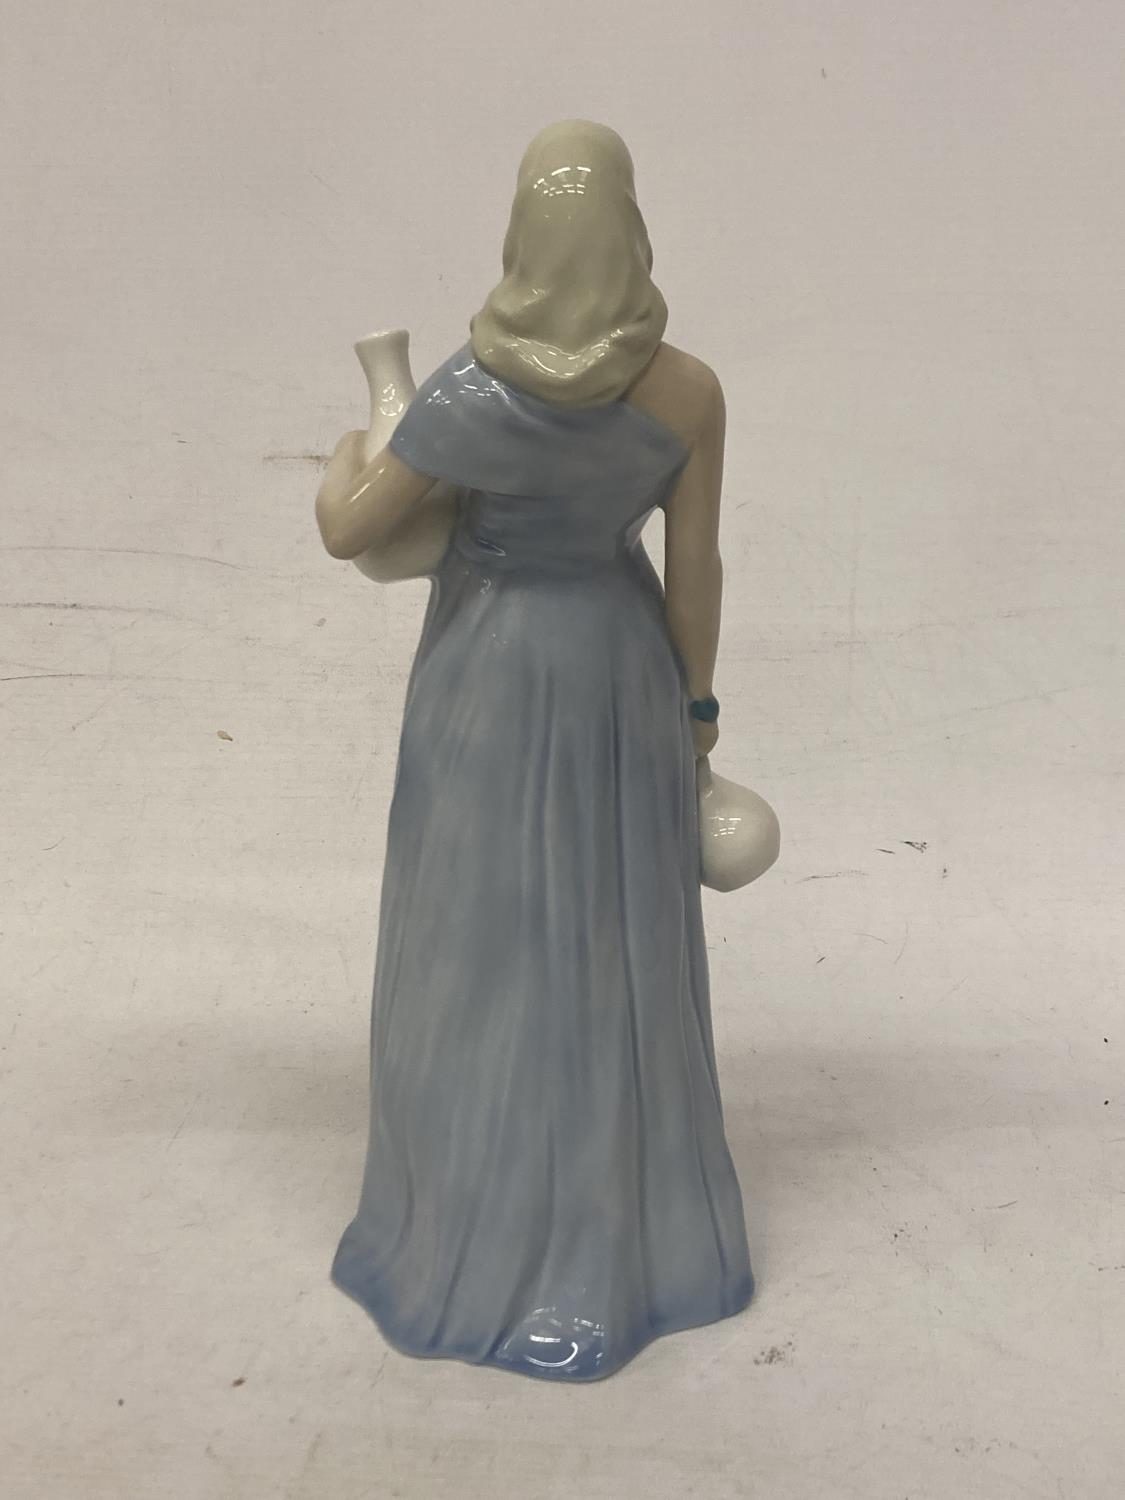 A ROYAL DOULTON FIGURE REFLECTIONS "WATER MAIDEN" HN 3155 - Image 3 of 5